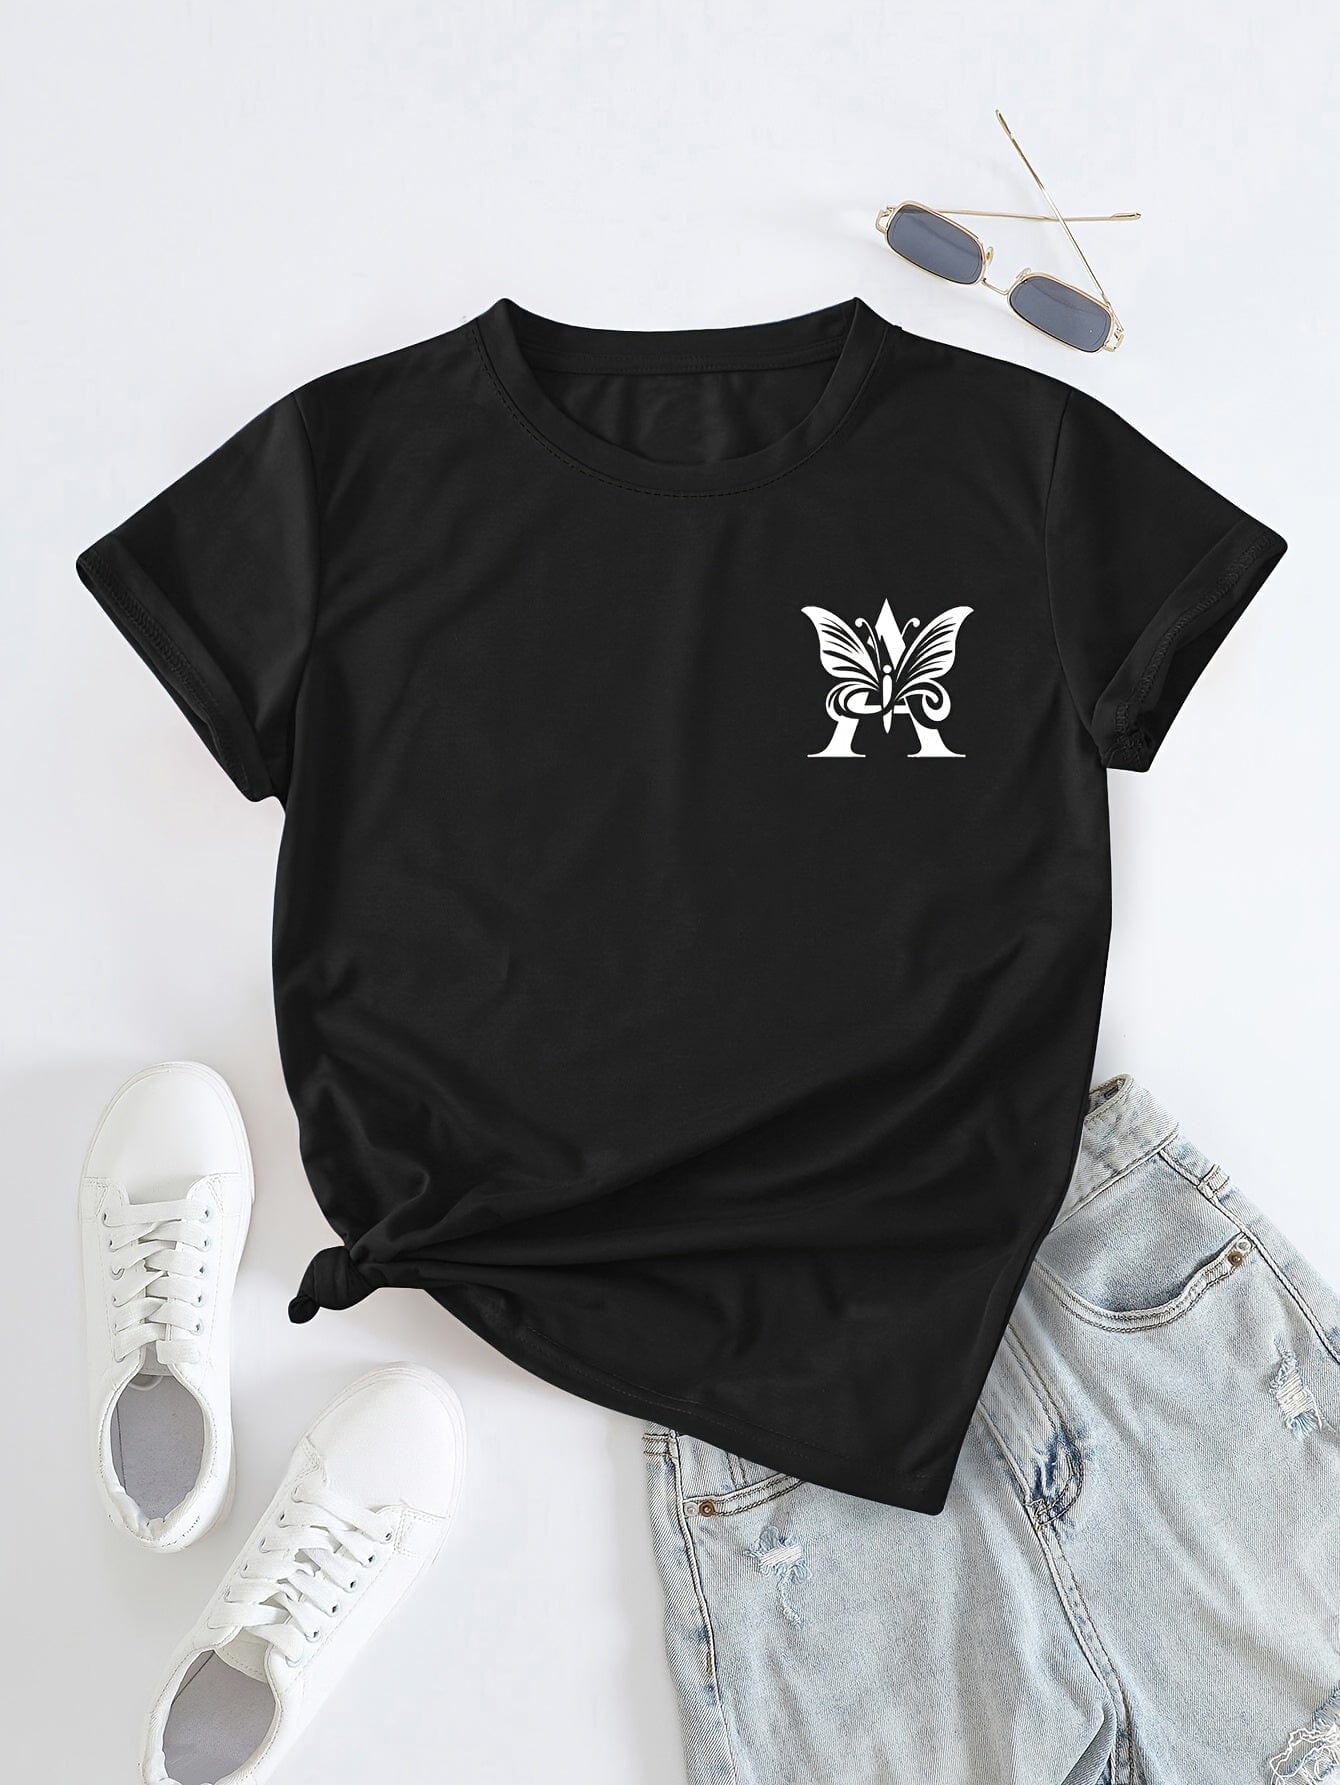 Charming Butterfly Print Casual T-shirt for Women